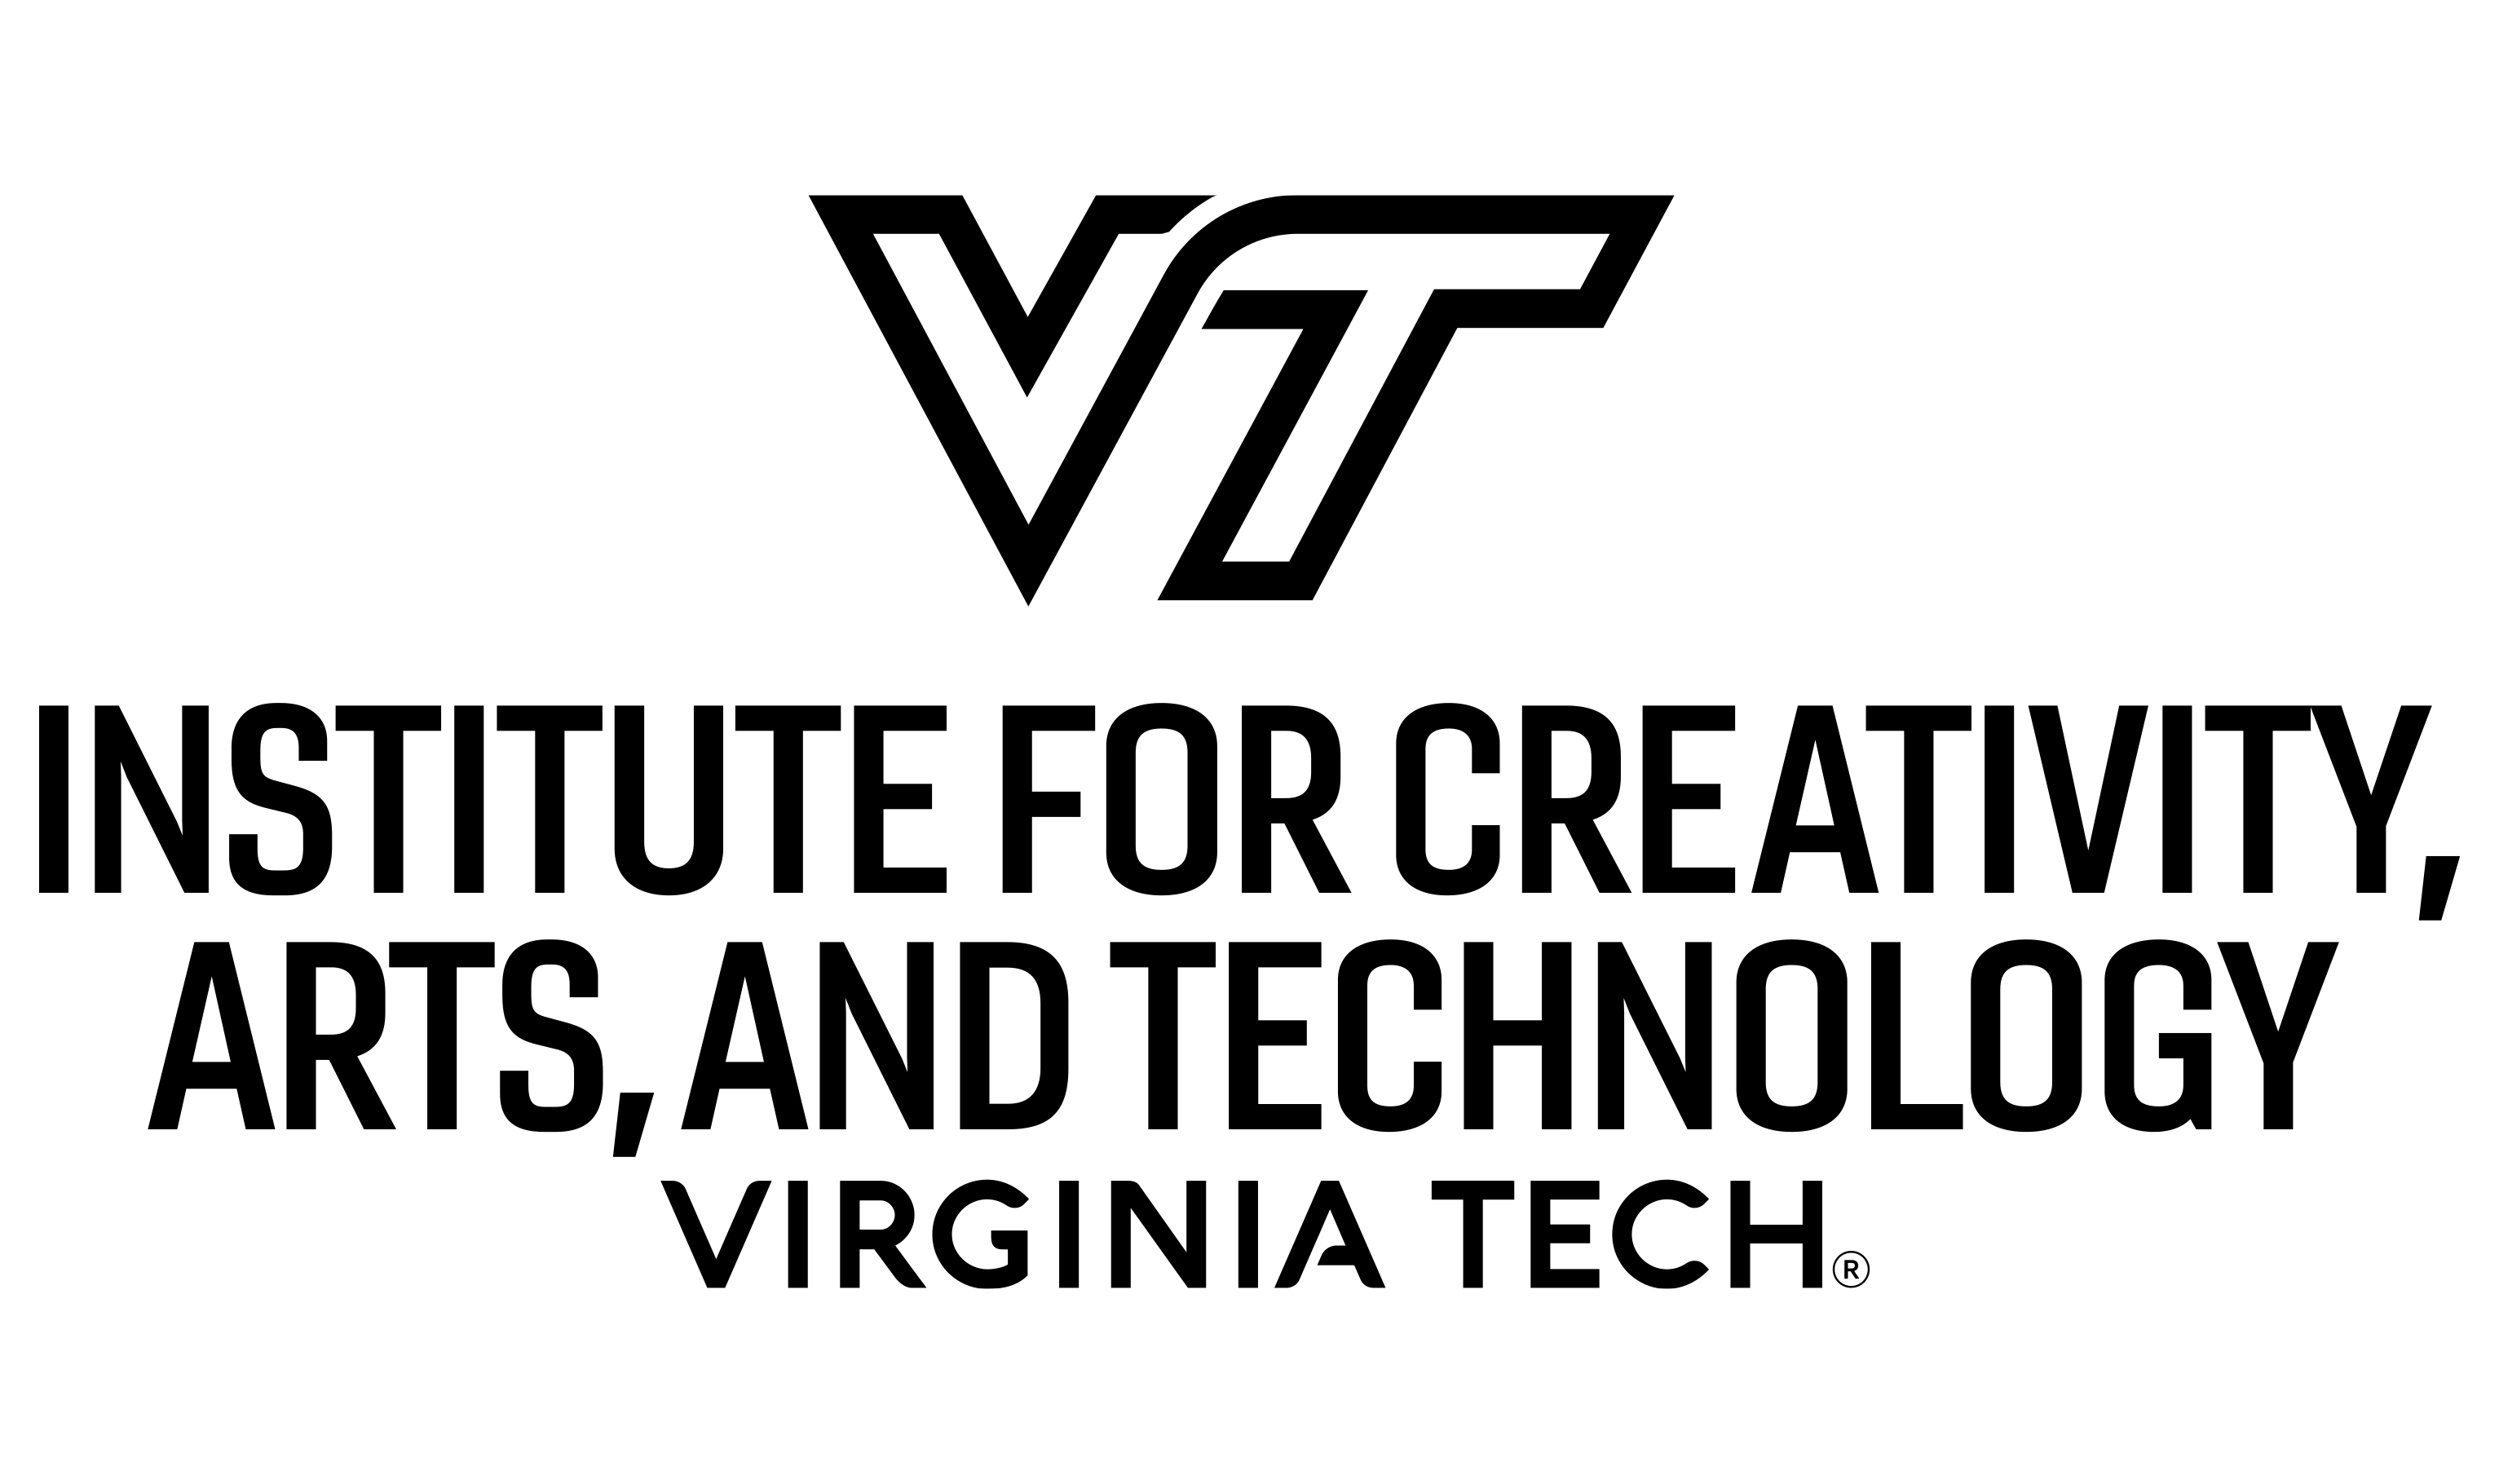 Virginia Tech Institute for Creativity, Arts, and Technology